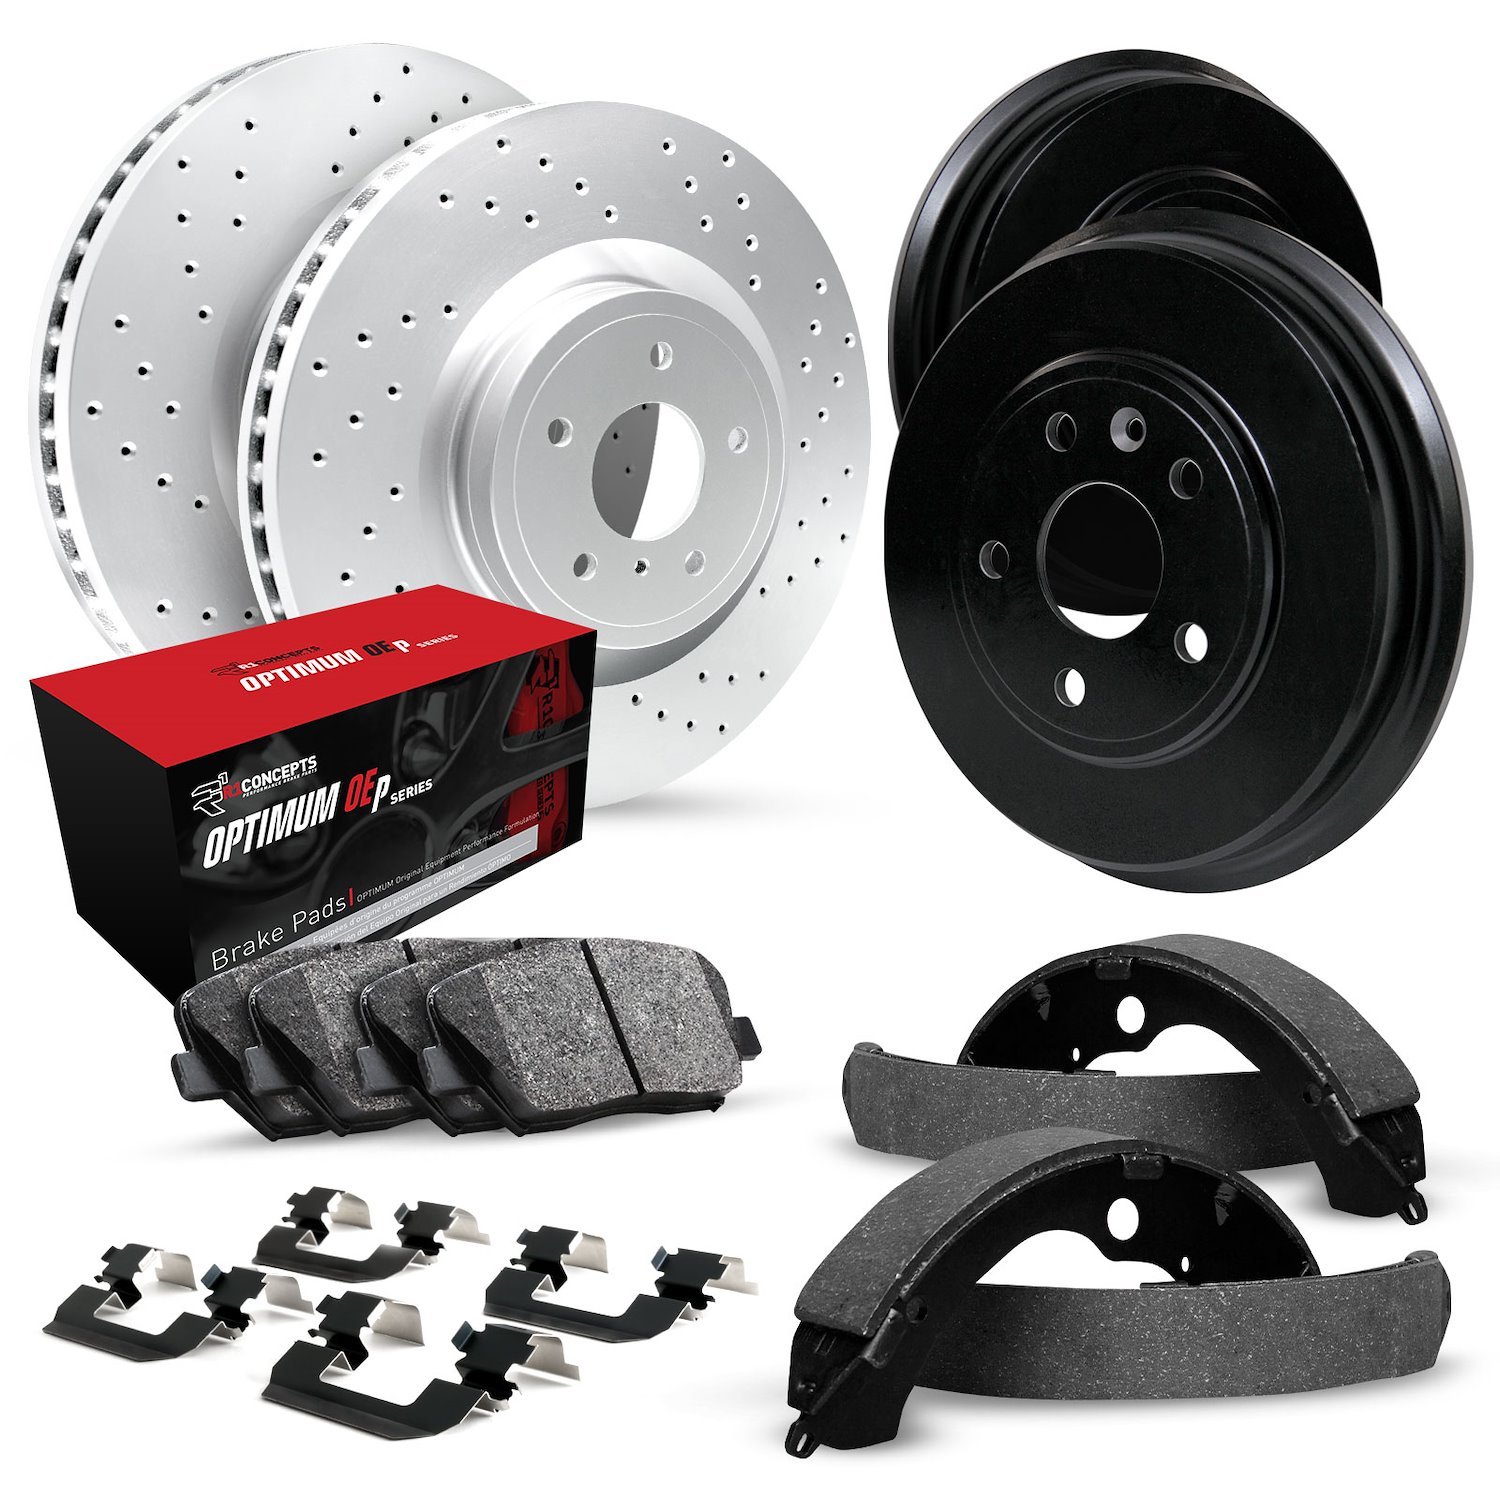 GEO-Carbon Drilled Brake Rotor & Drum Set w/Optimum OE Pads, Shoes, & Hardware, 1994-1995 GM, Position: Front & Rear